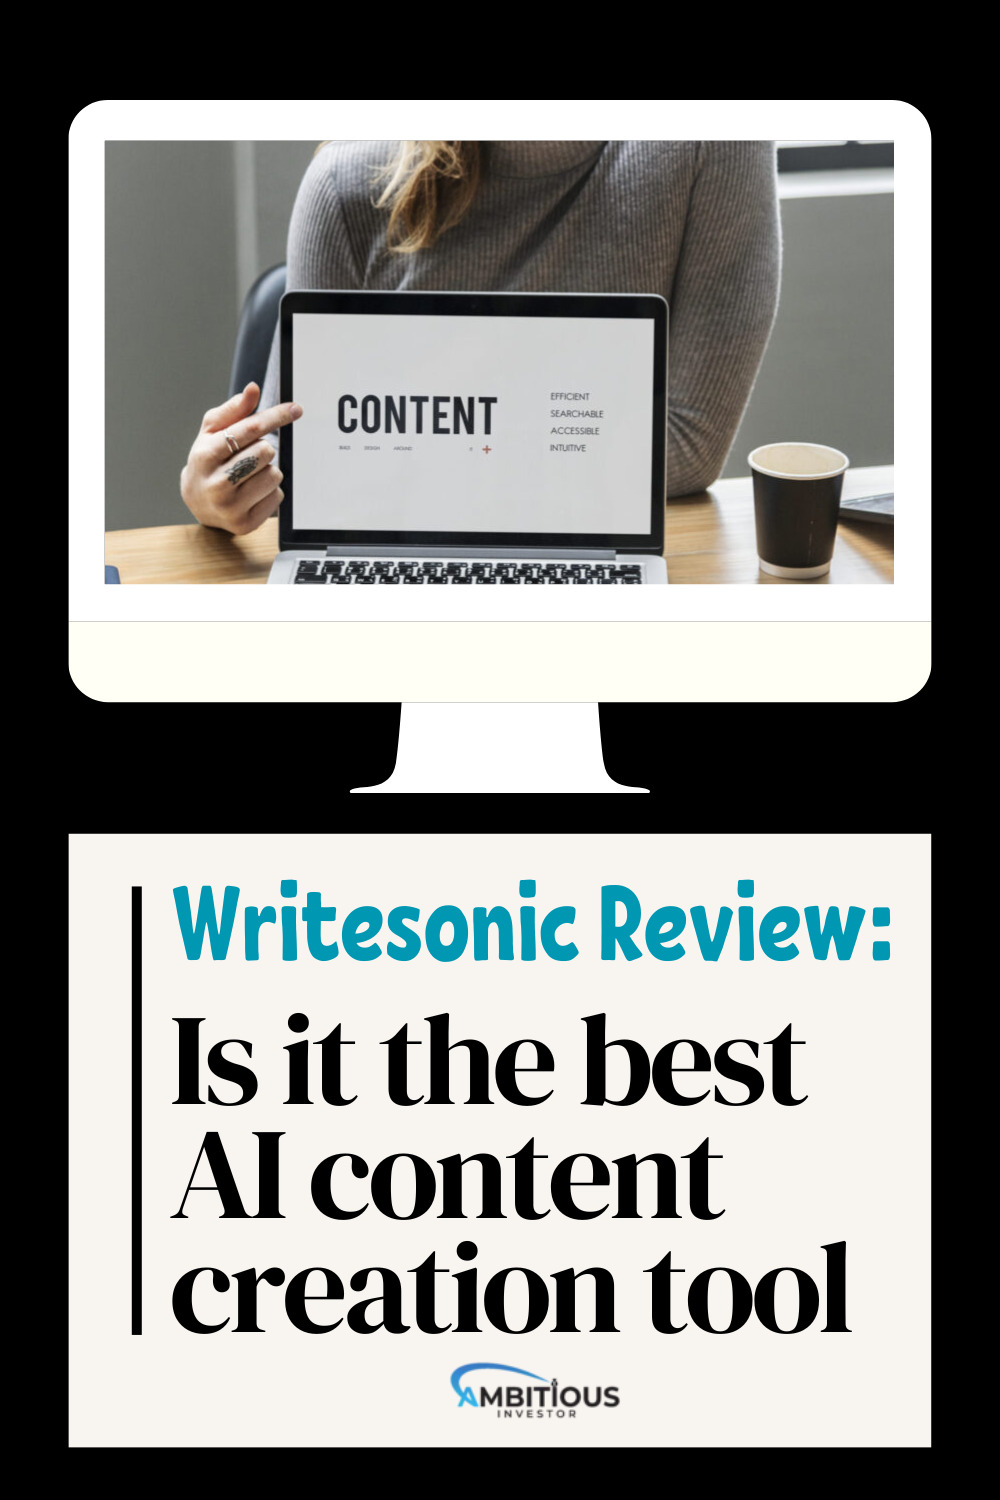 Writesonic Review: Is It the Best AI Content Creation Tool